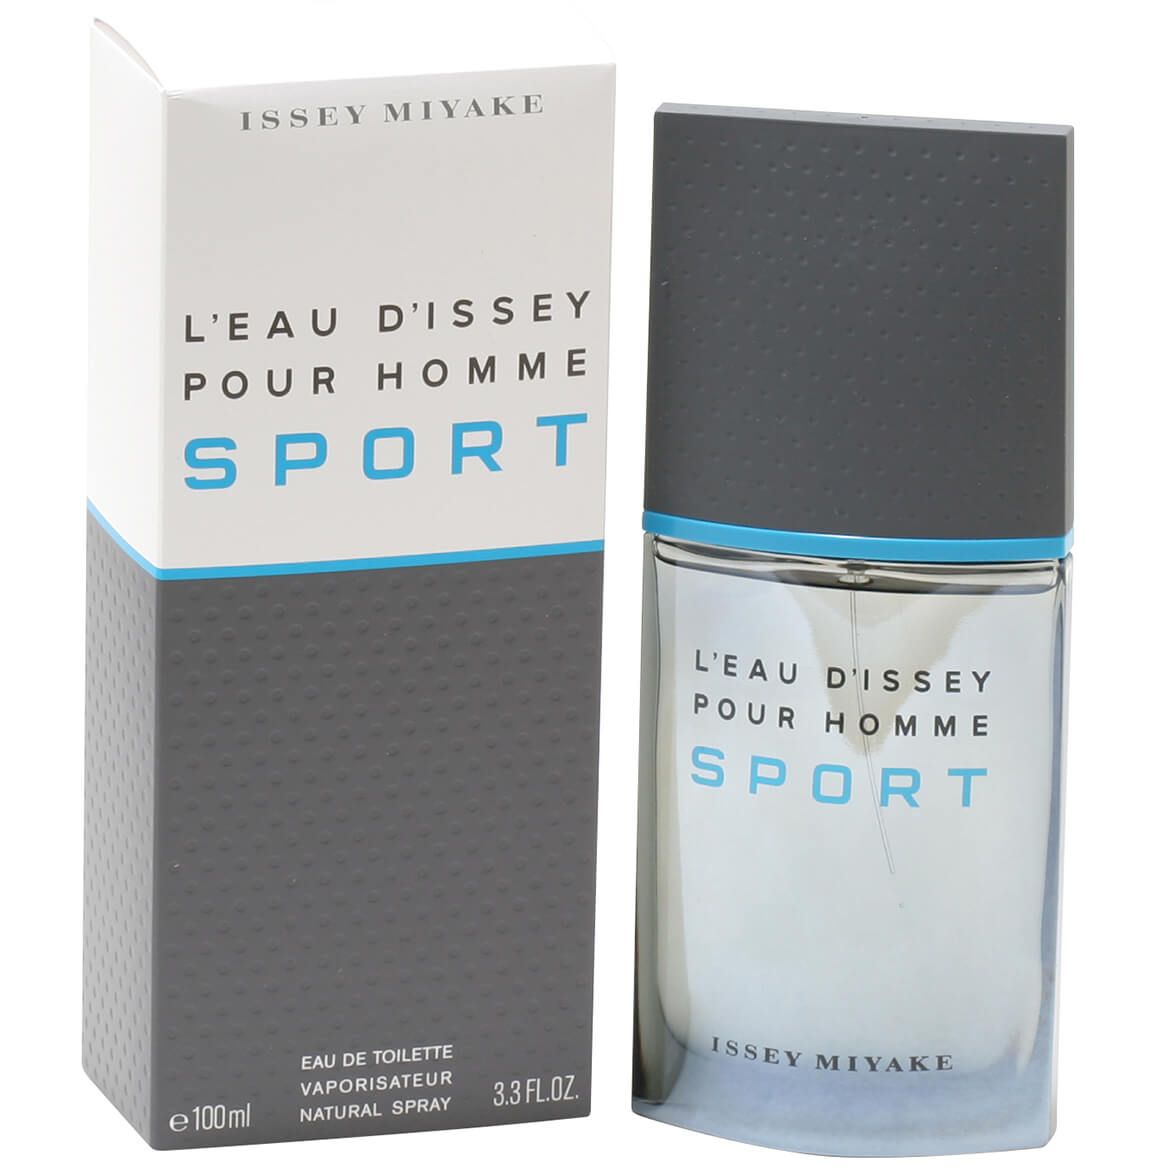 L'eau d'issey Homme Sport by Issey Miyake Men EDT, 3.4 oz. + '-' + 373164